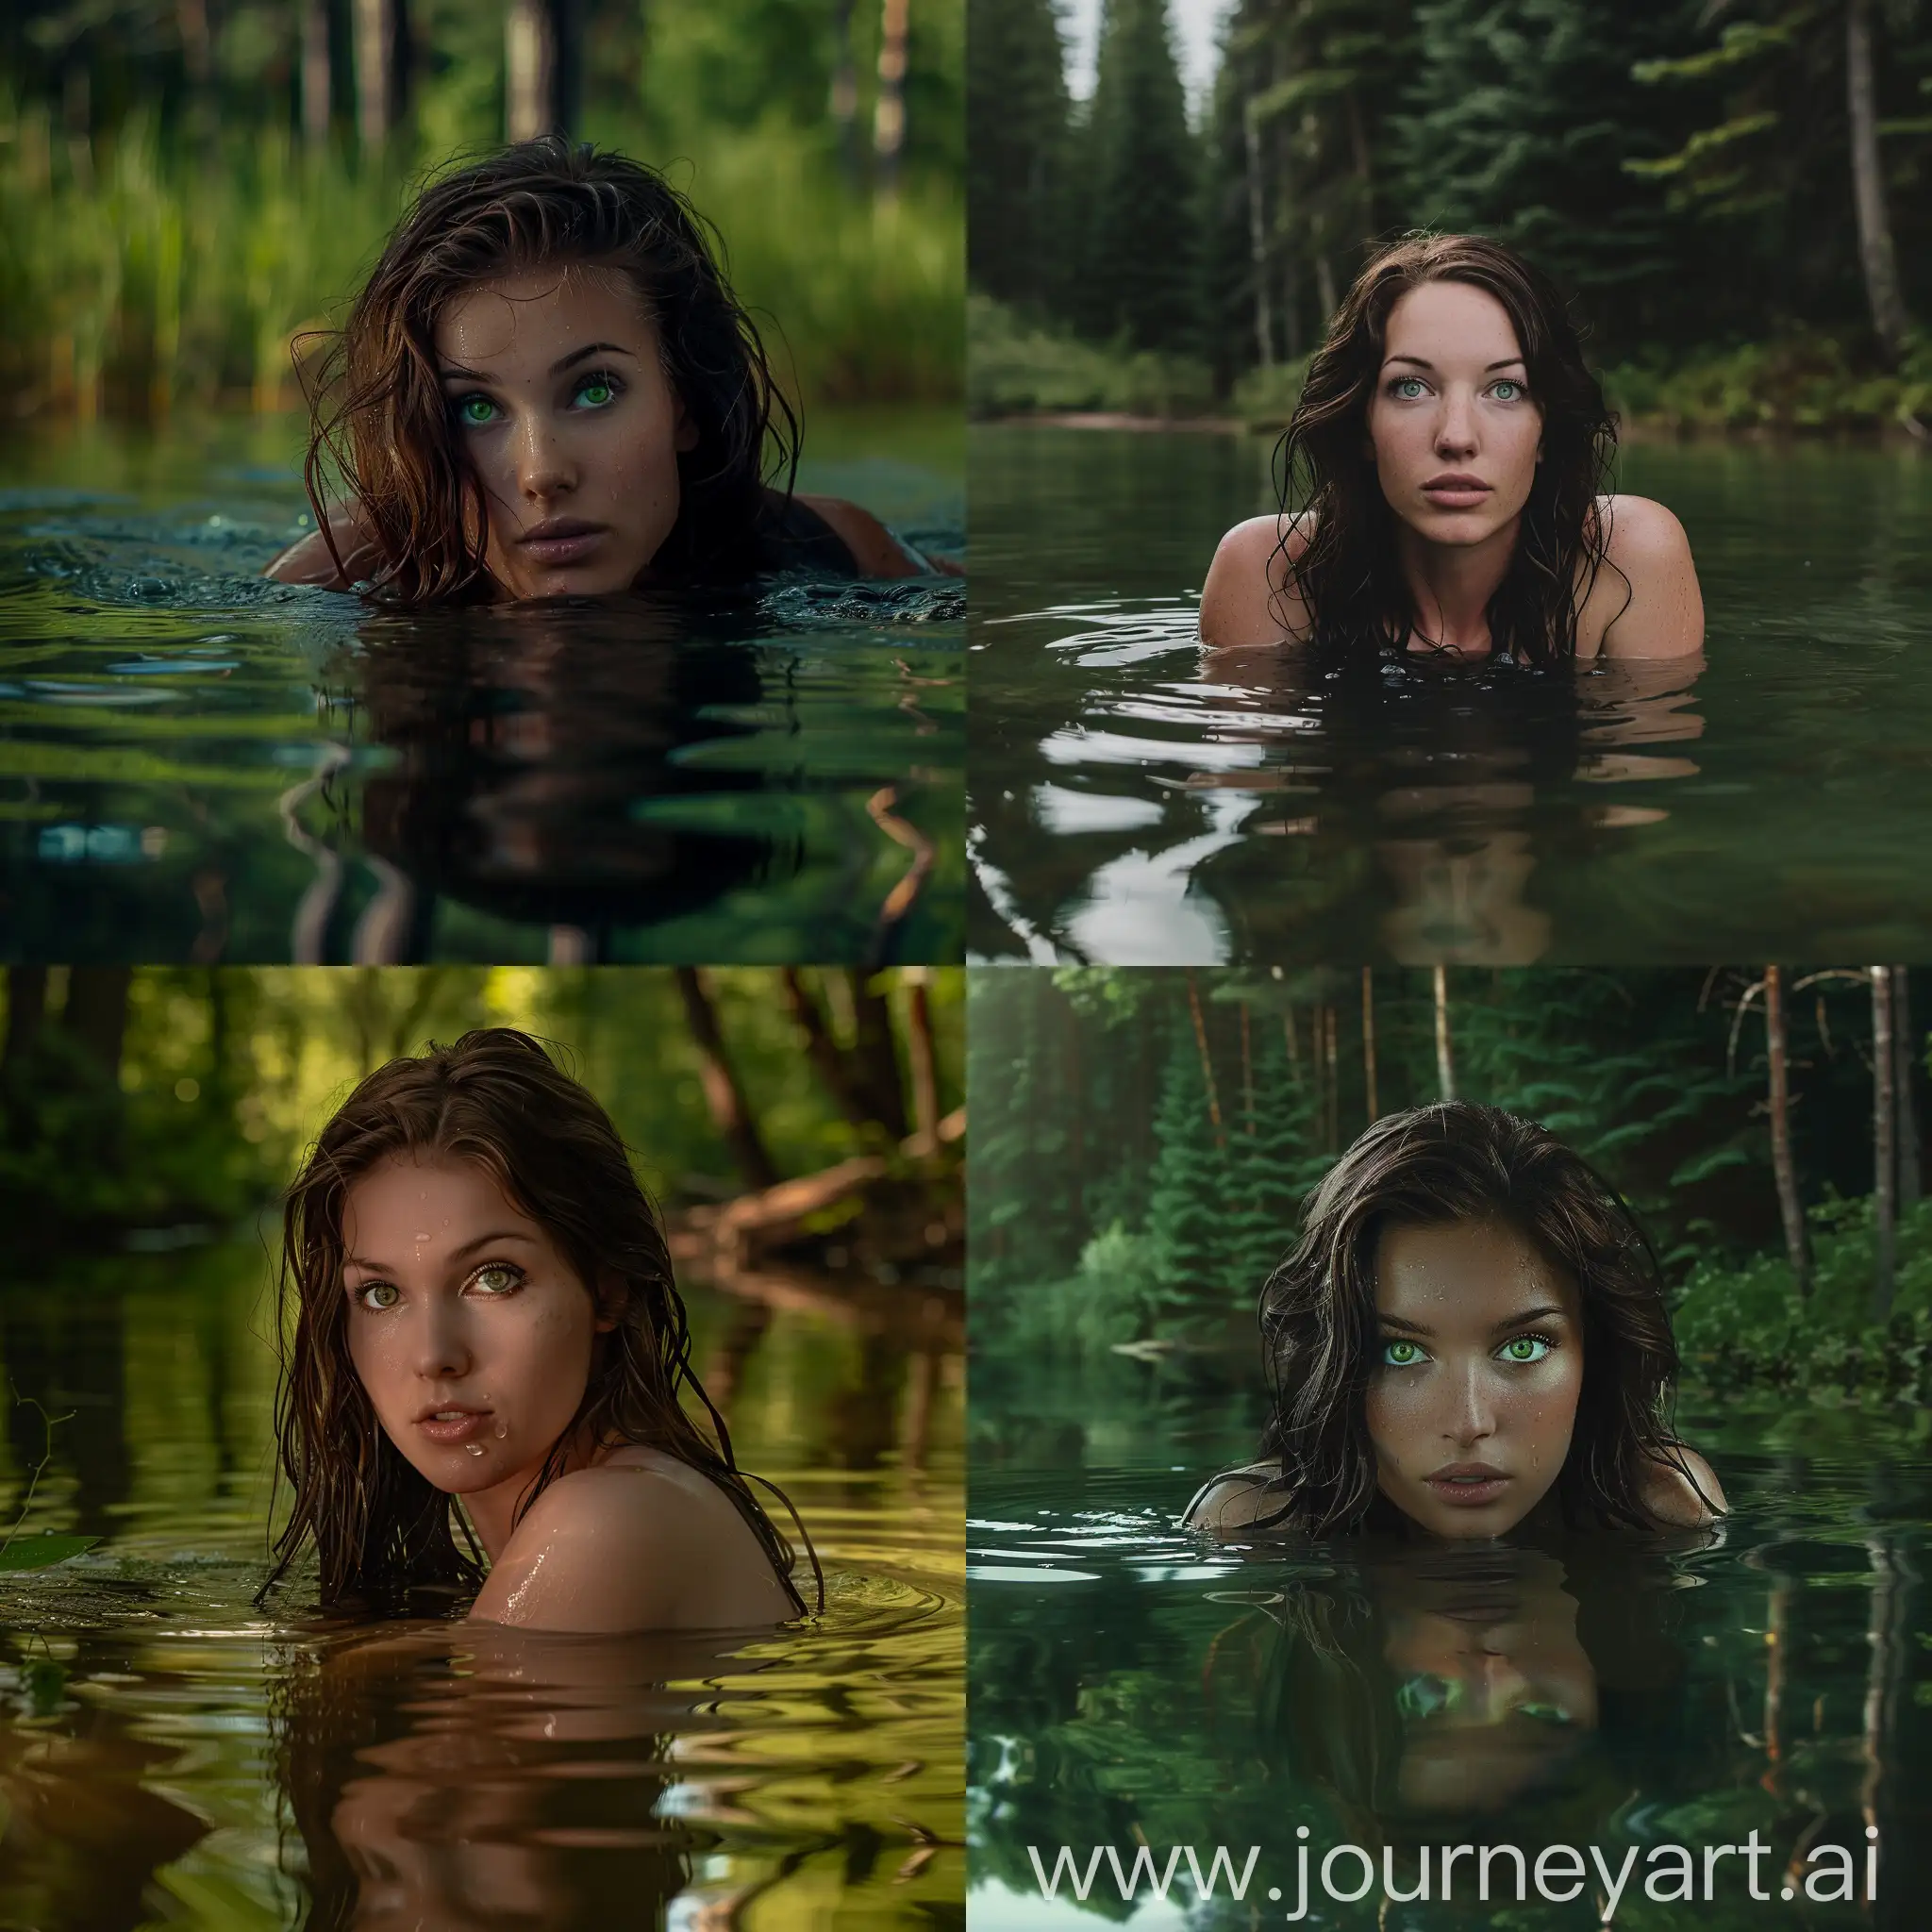 Muscular woman with brown hair and green eyes taking bath in a lake deep in a forest
